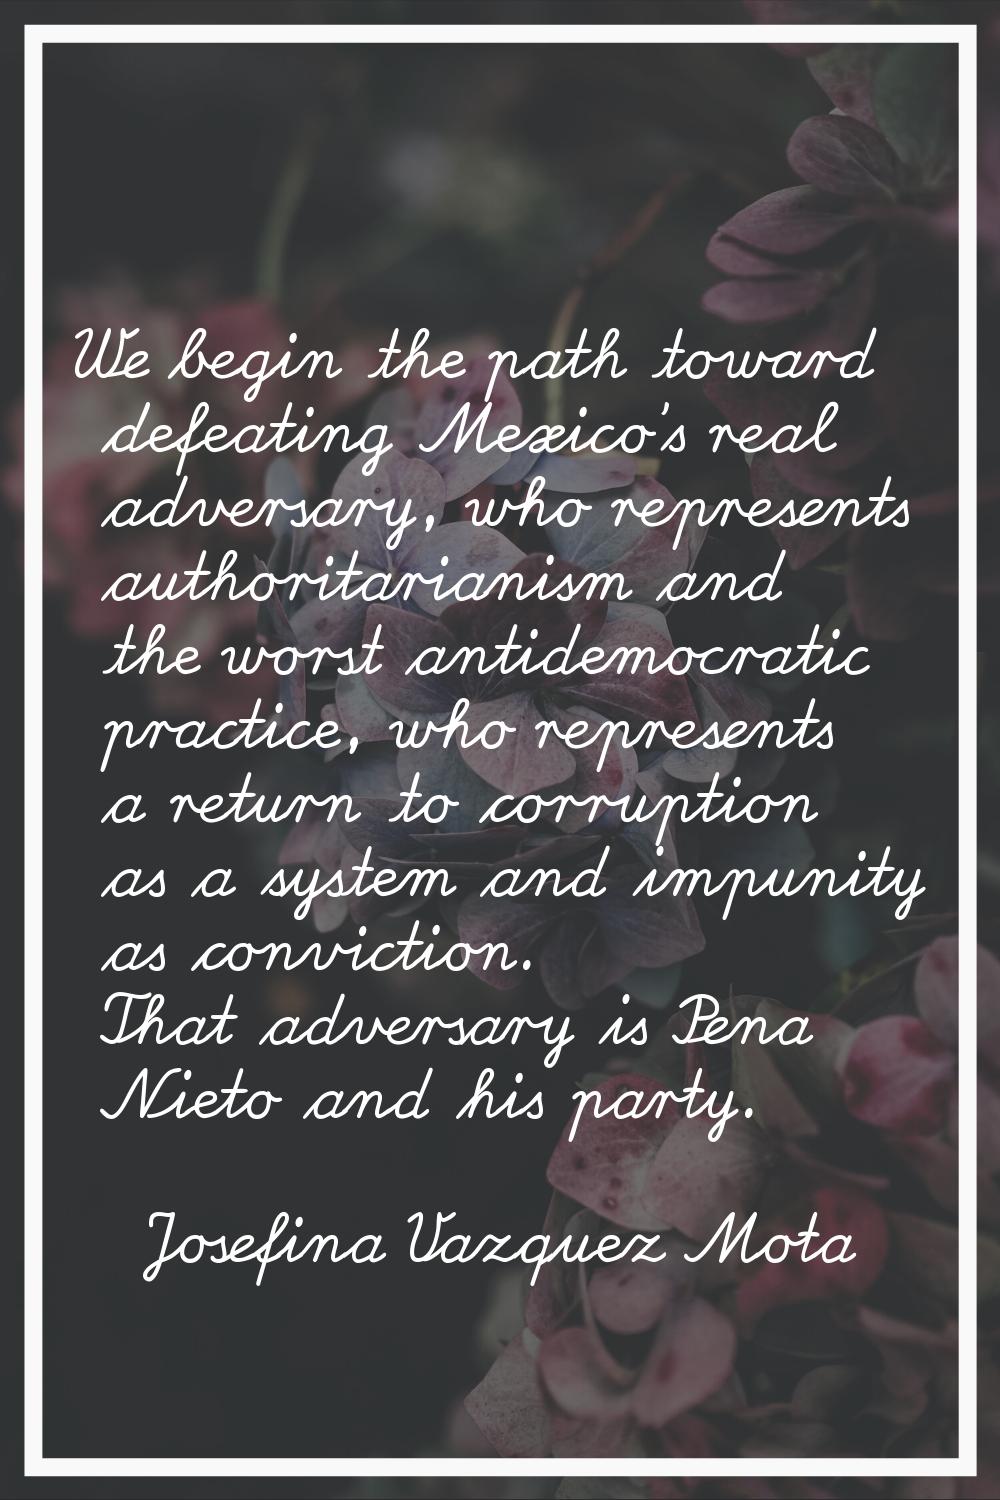 We begin the path toward defeating Mexico's real adversary, who represents authoritarianism and the